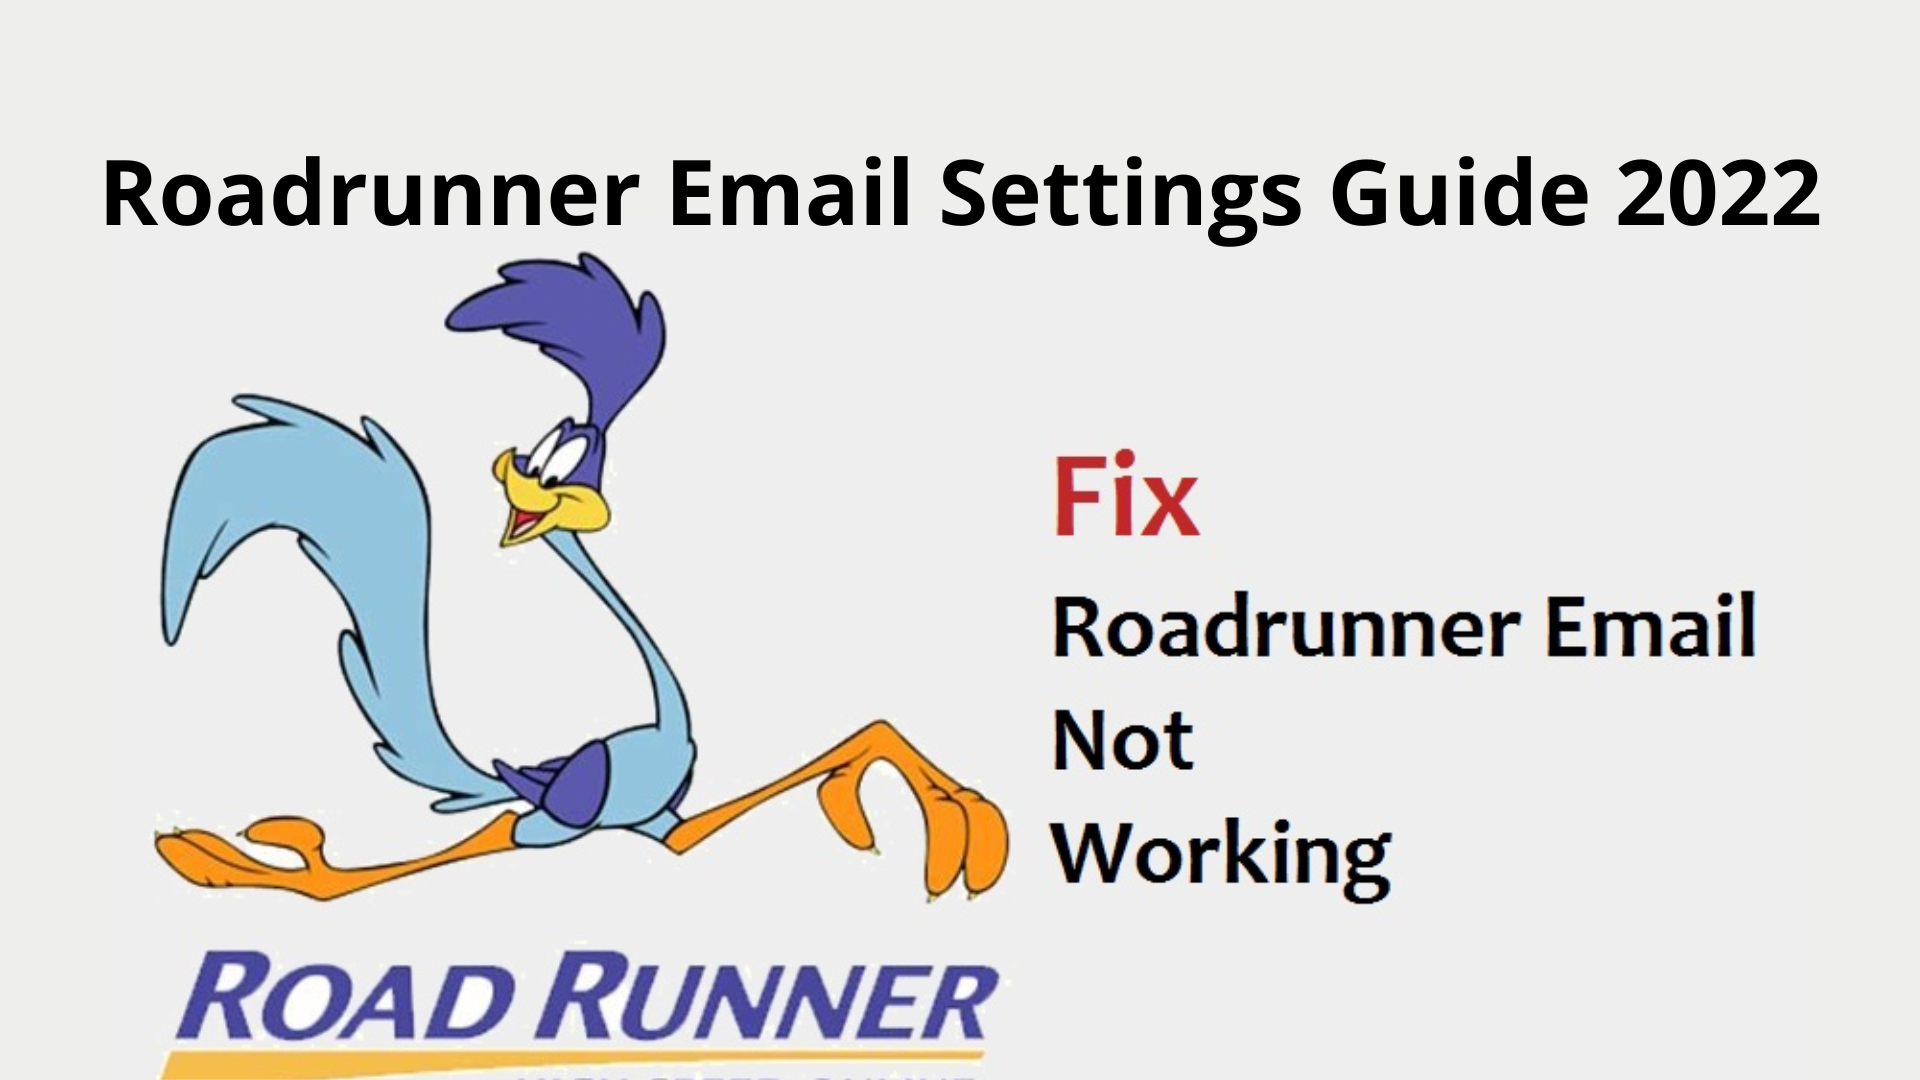 Article about Roadrunner Email Settings Guide 2022 